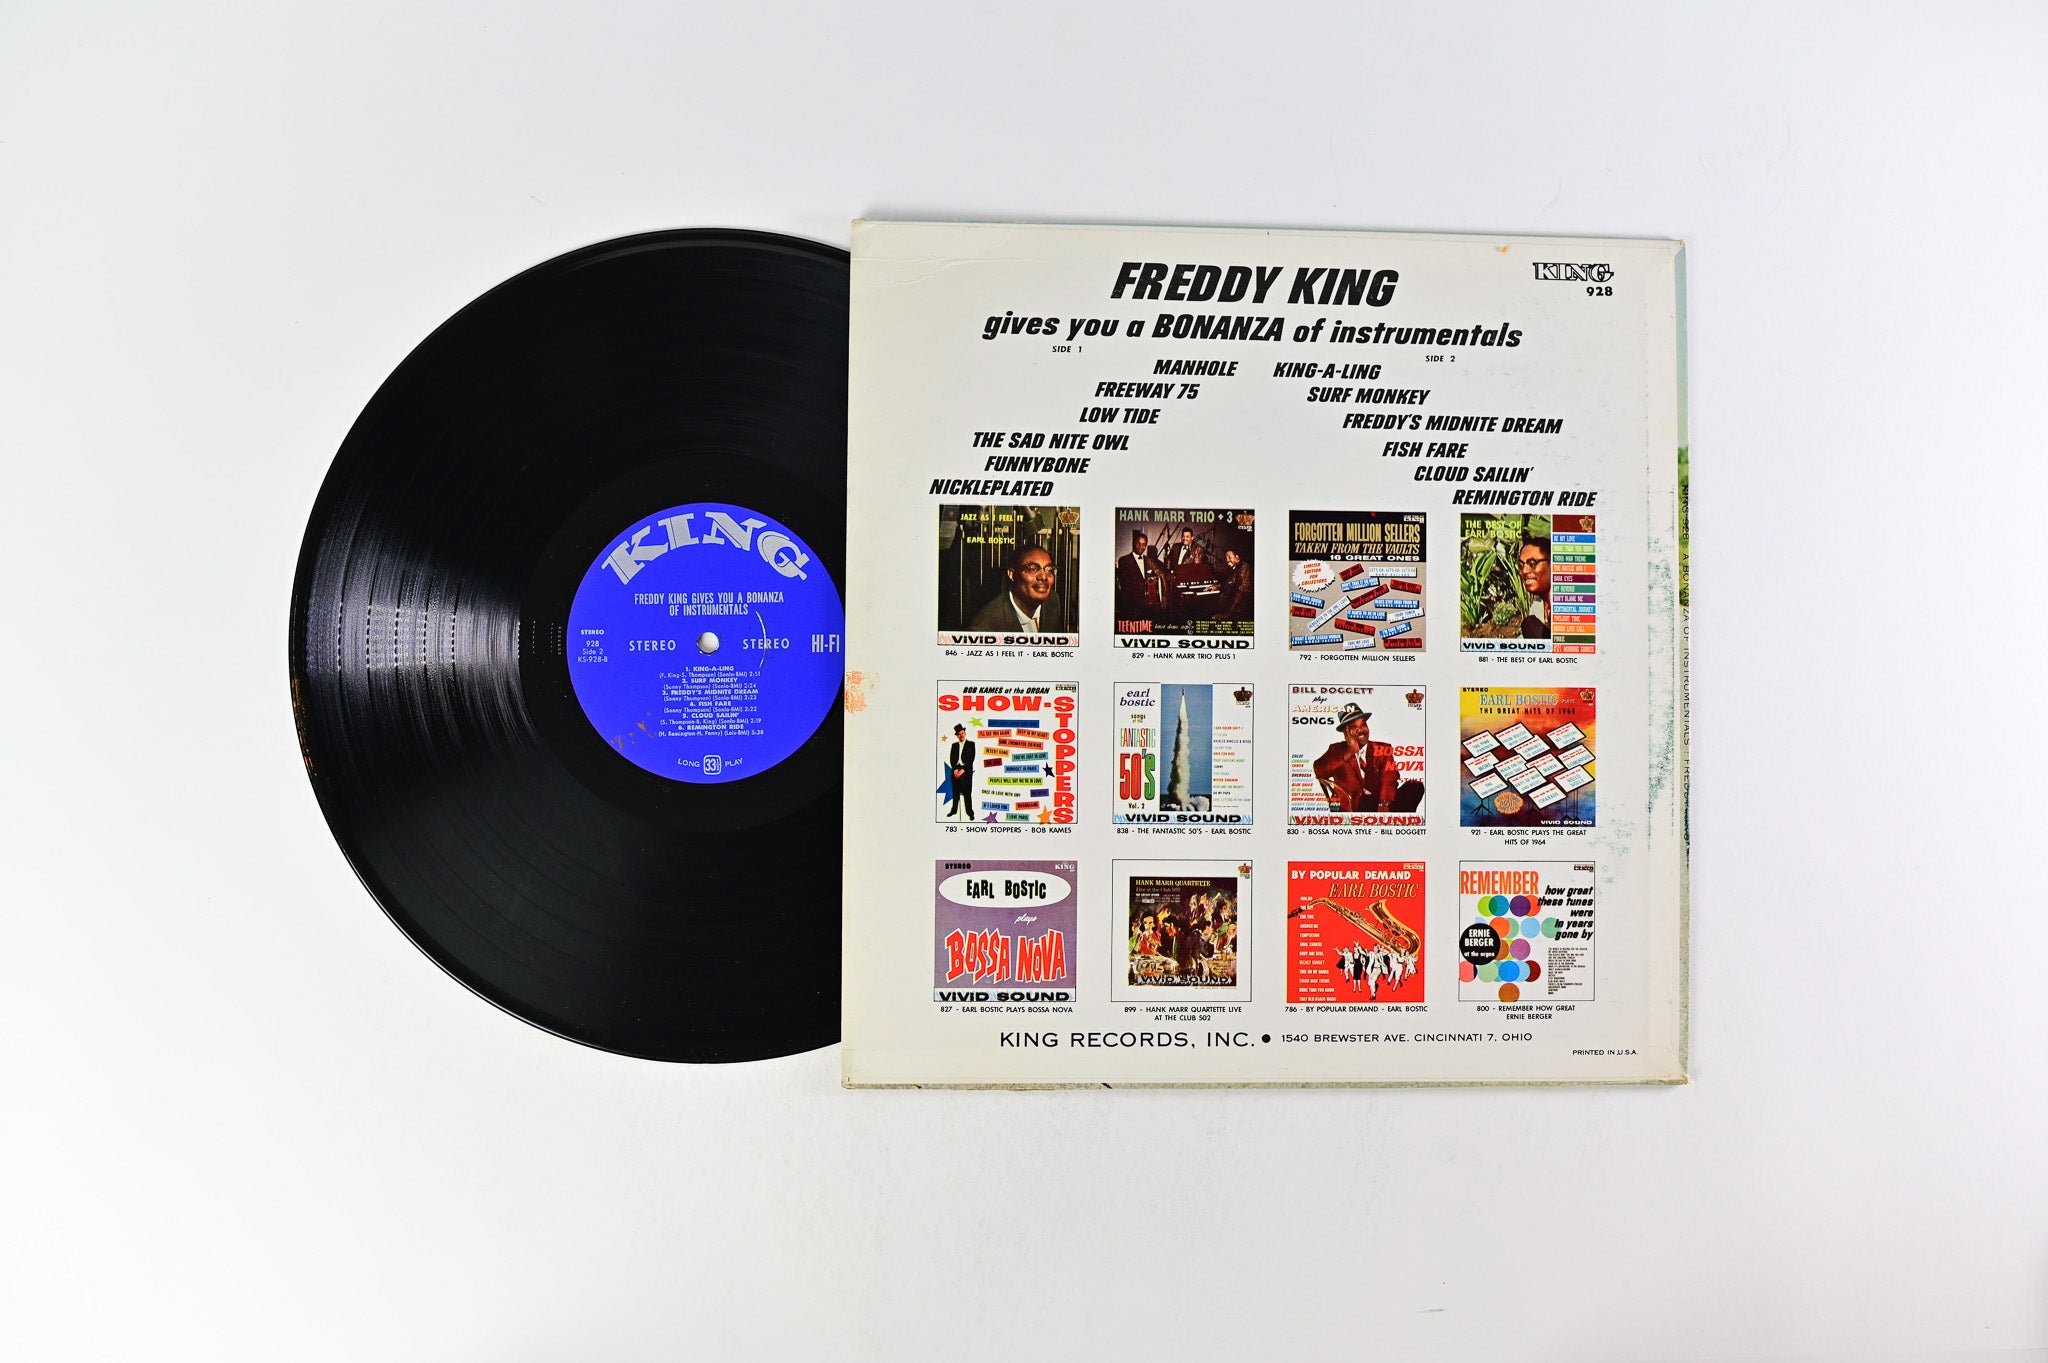 Freddie King - Gives You A Bonanza Of Instrumentals on King